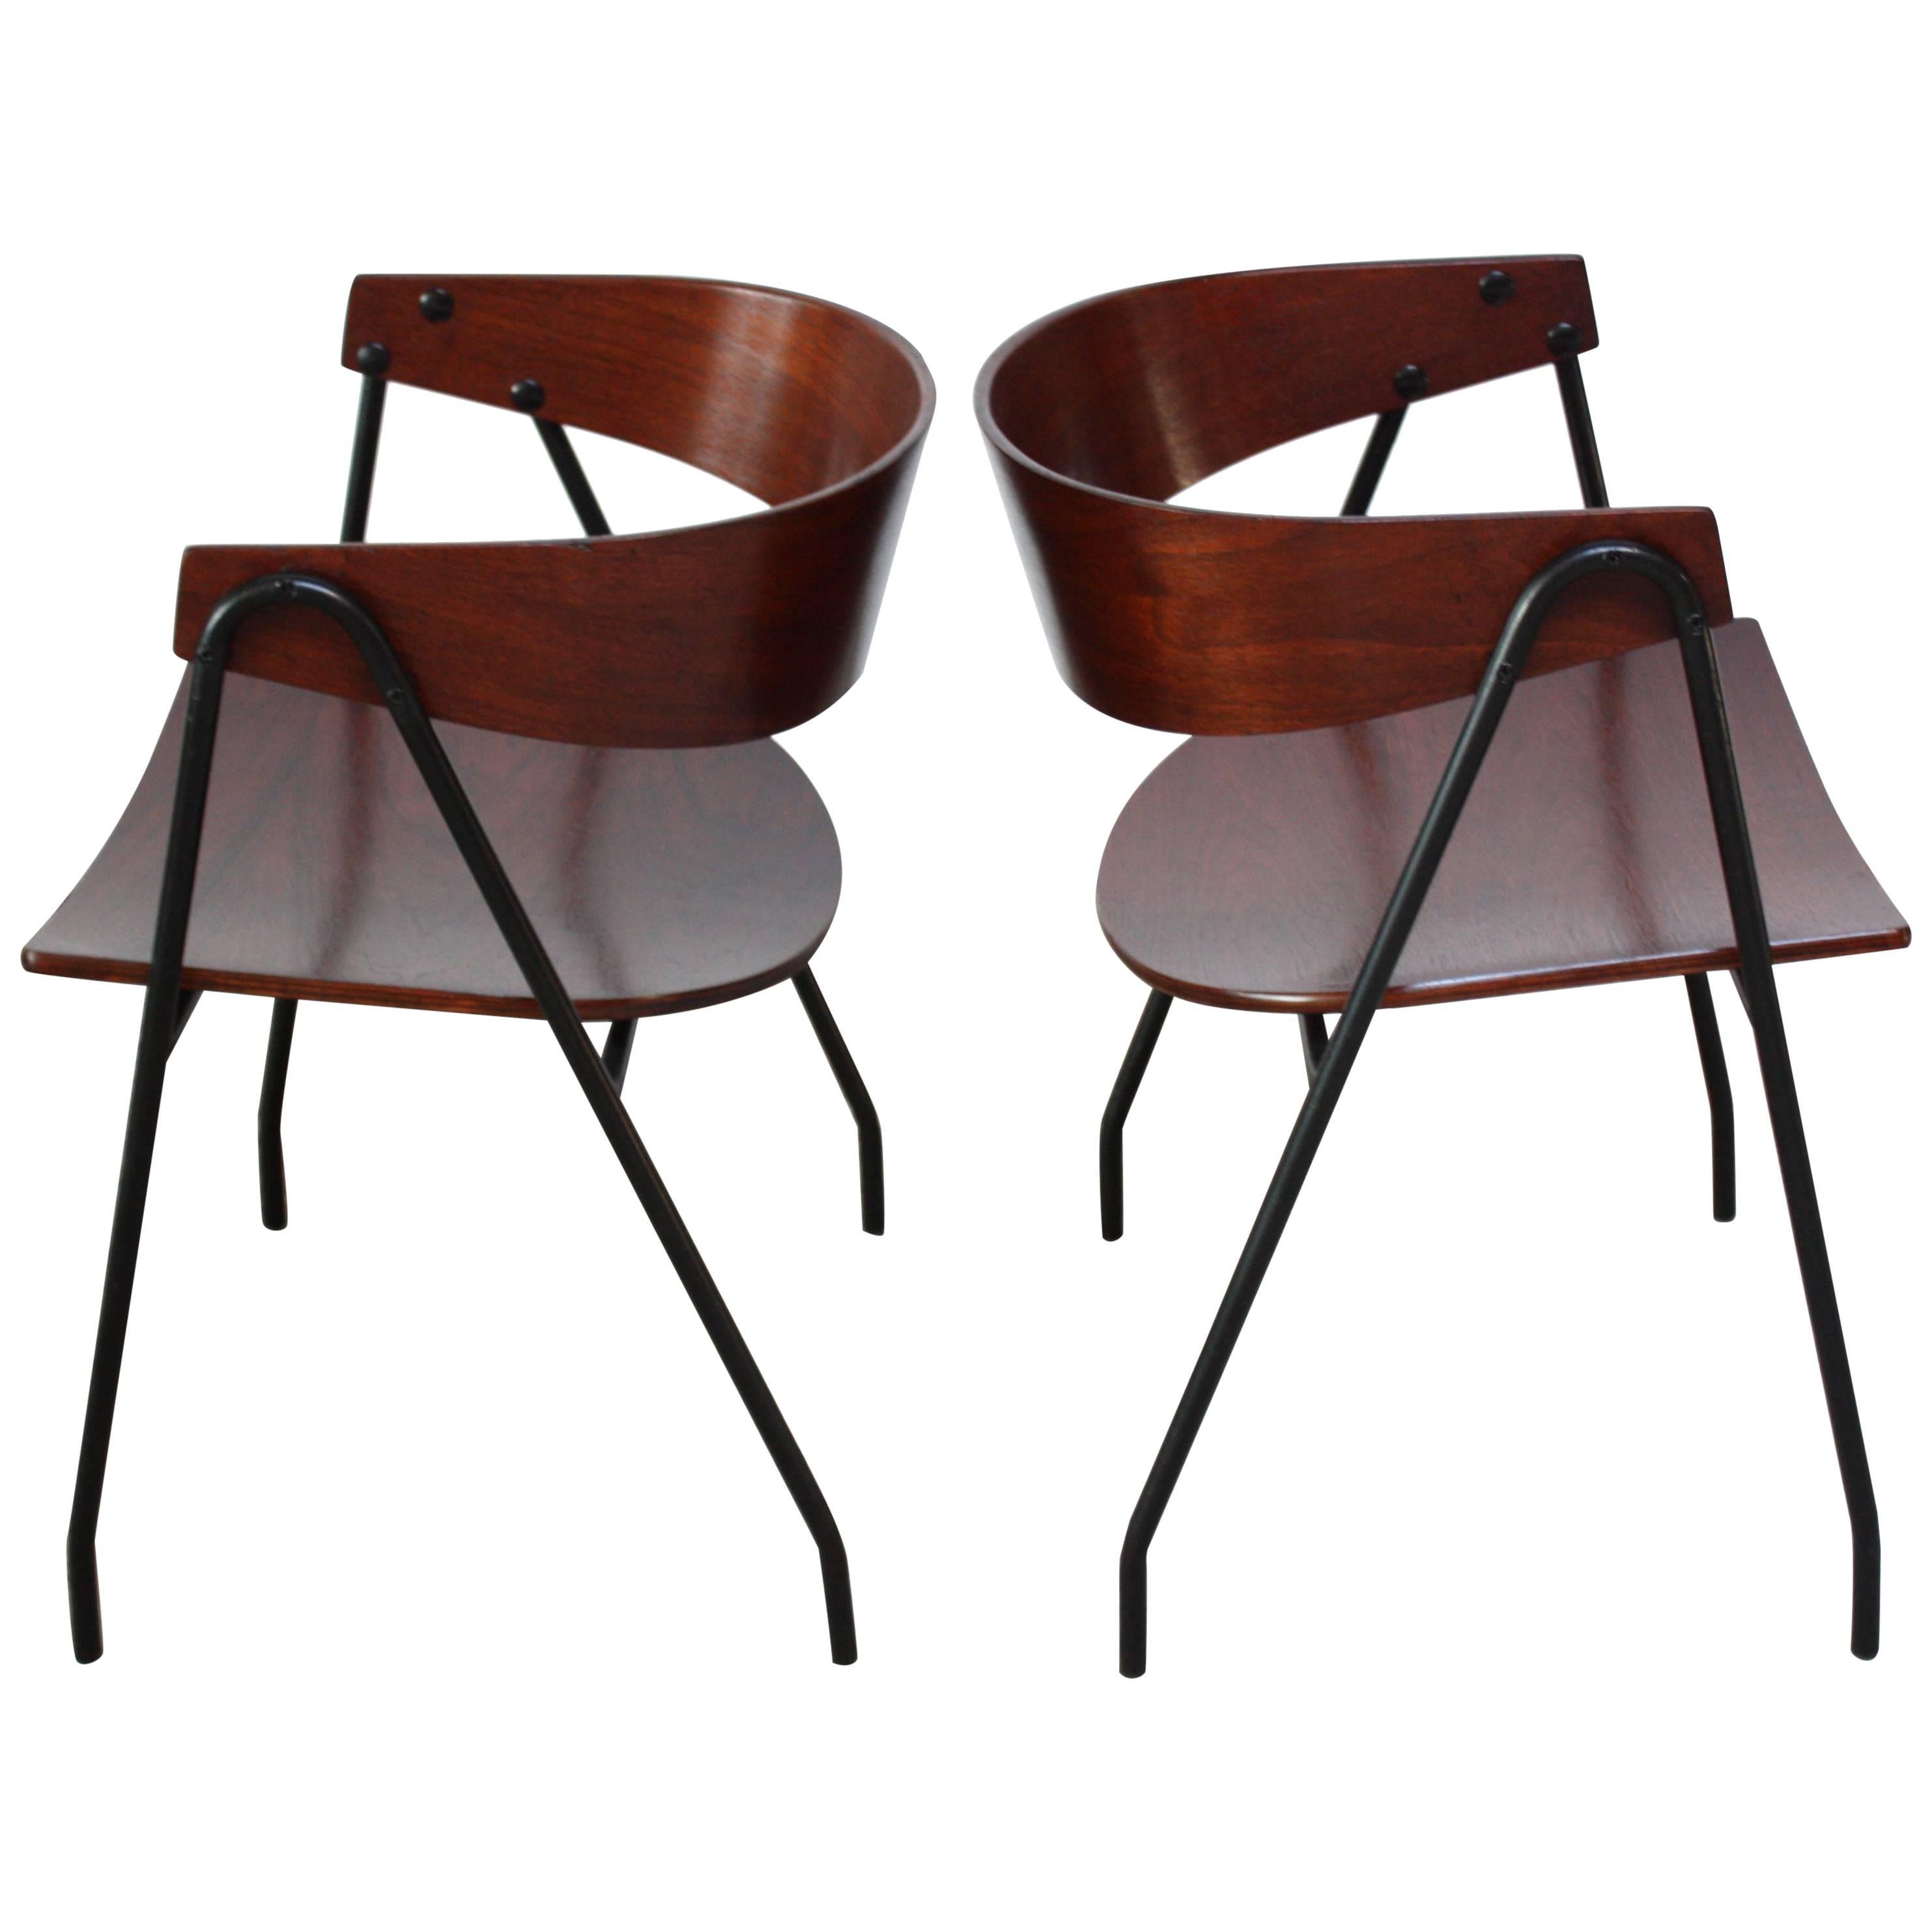 Pair of French Bentwood and Steel 'Compass' Chairs after Pierre Guariche